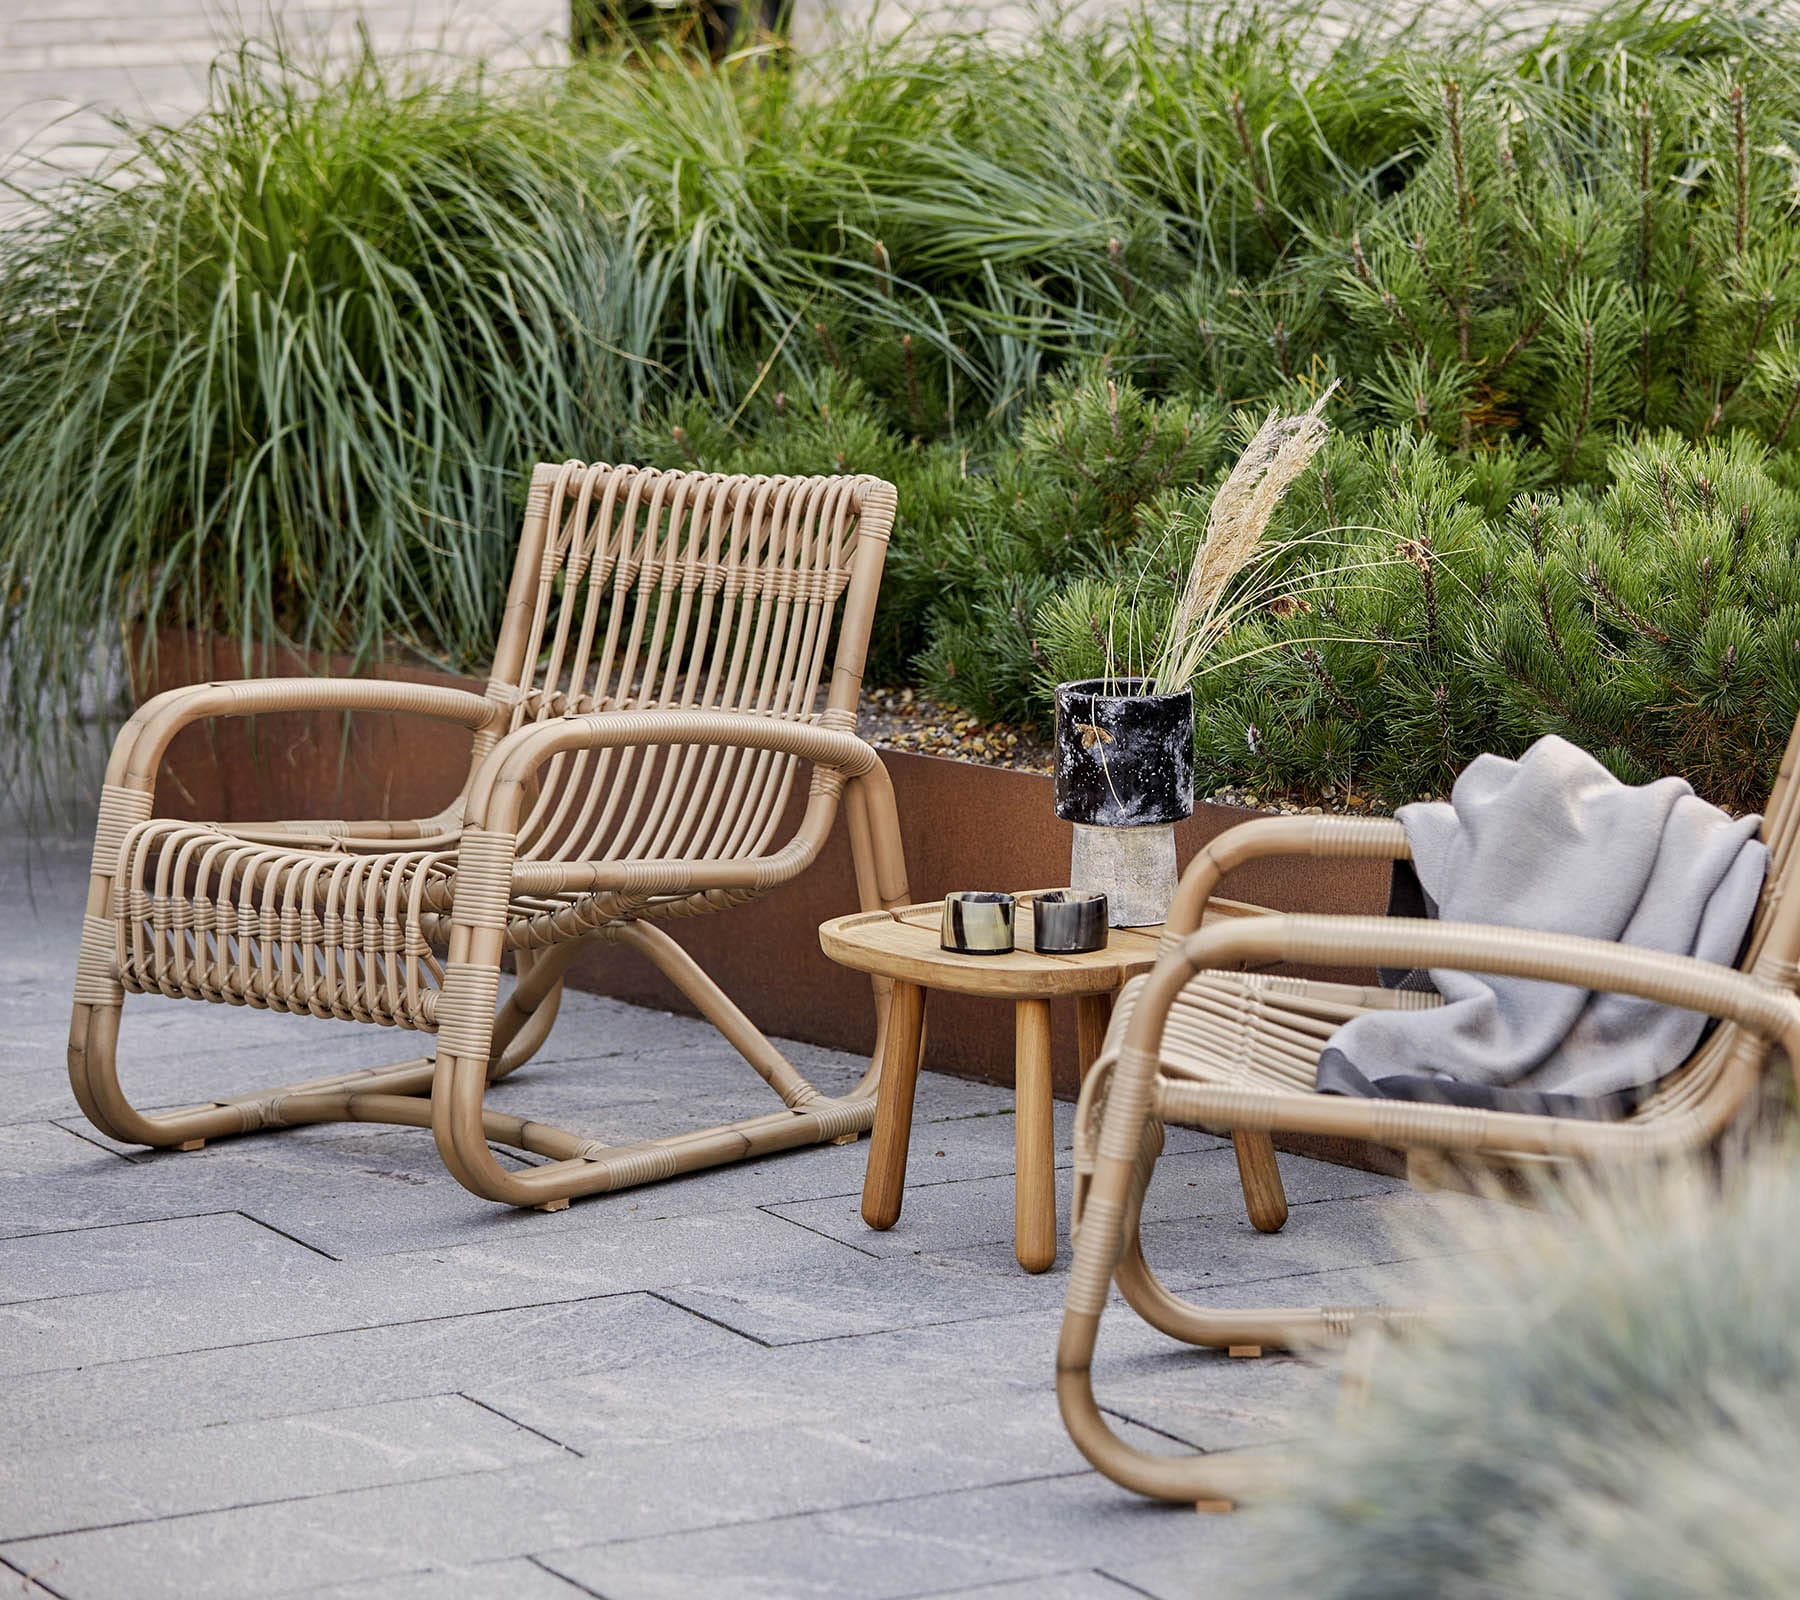 Boxhill's Curve Lounge Weave Outdoor Chair Natural lifestyle image with side table at patio